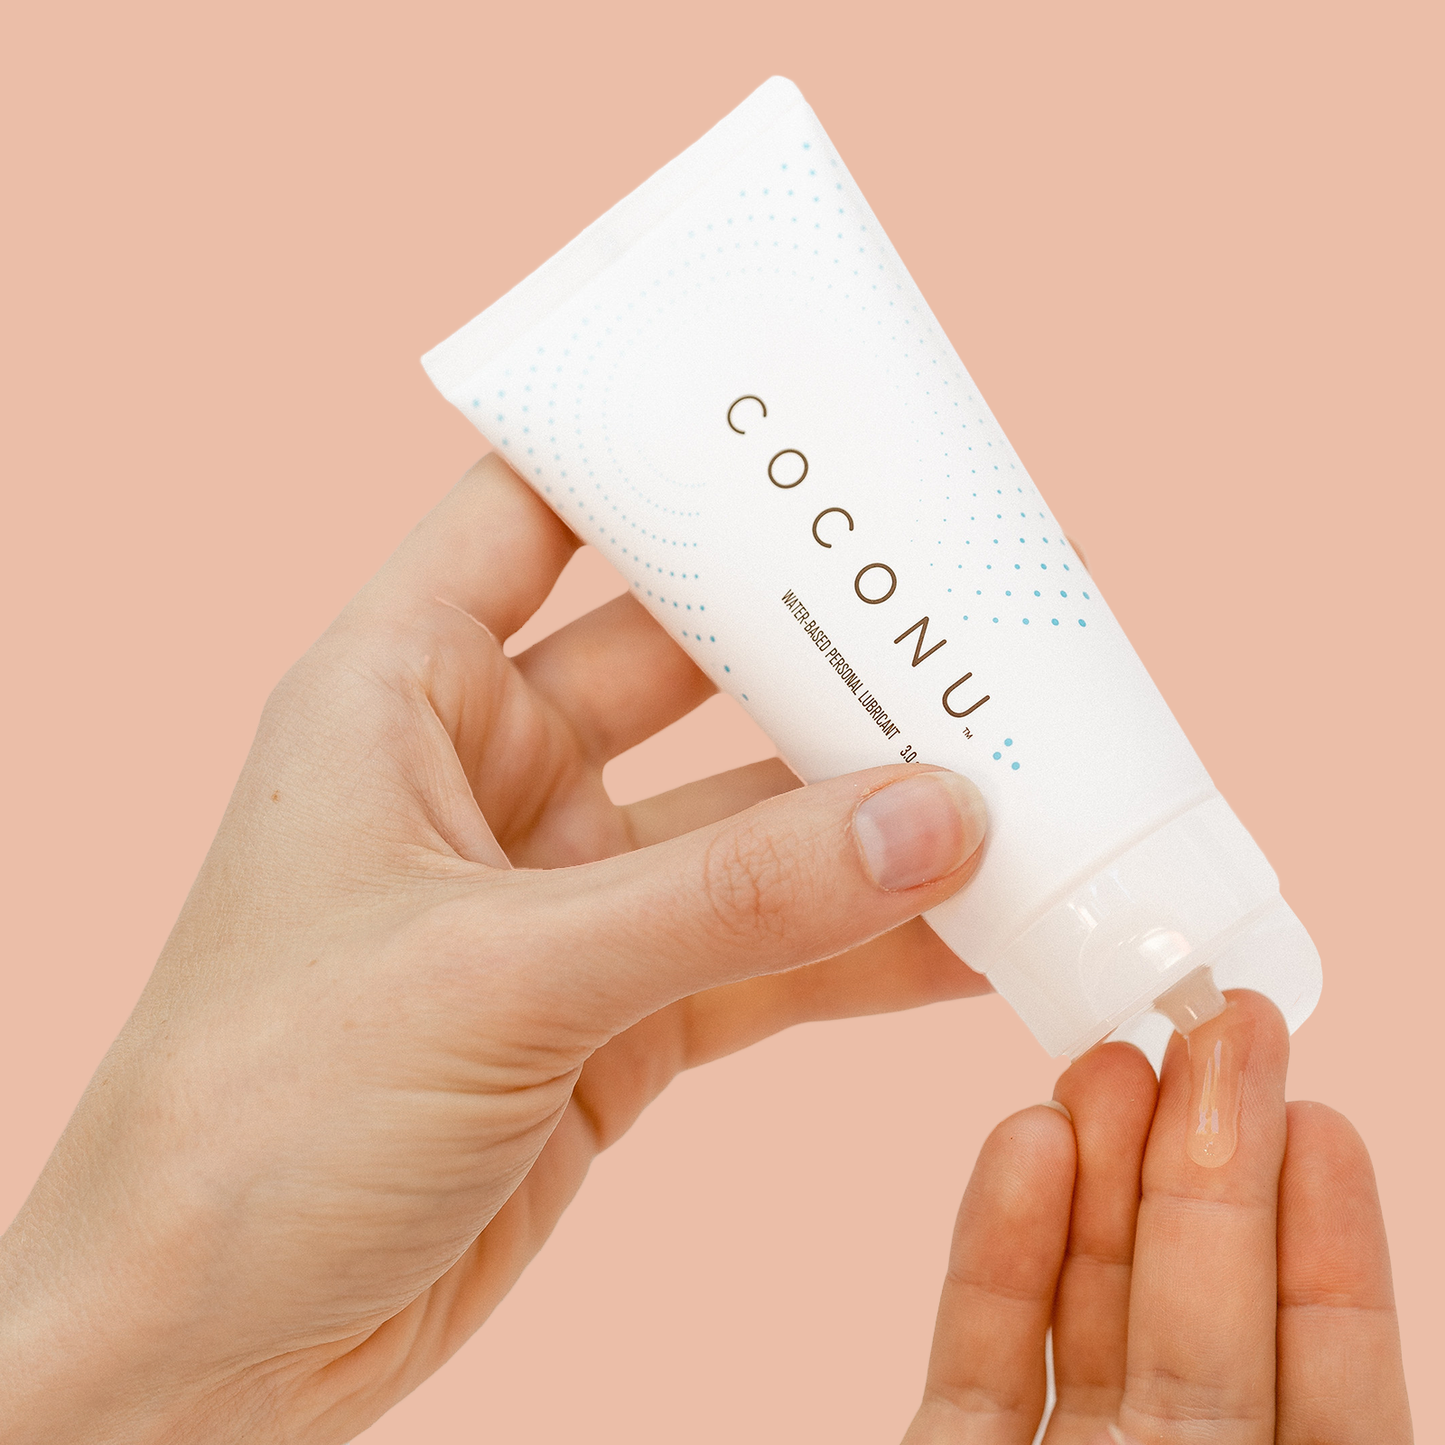 Coconu lubricant bottle squeezing on hand